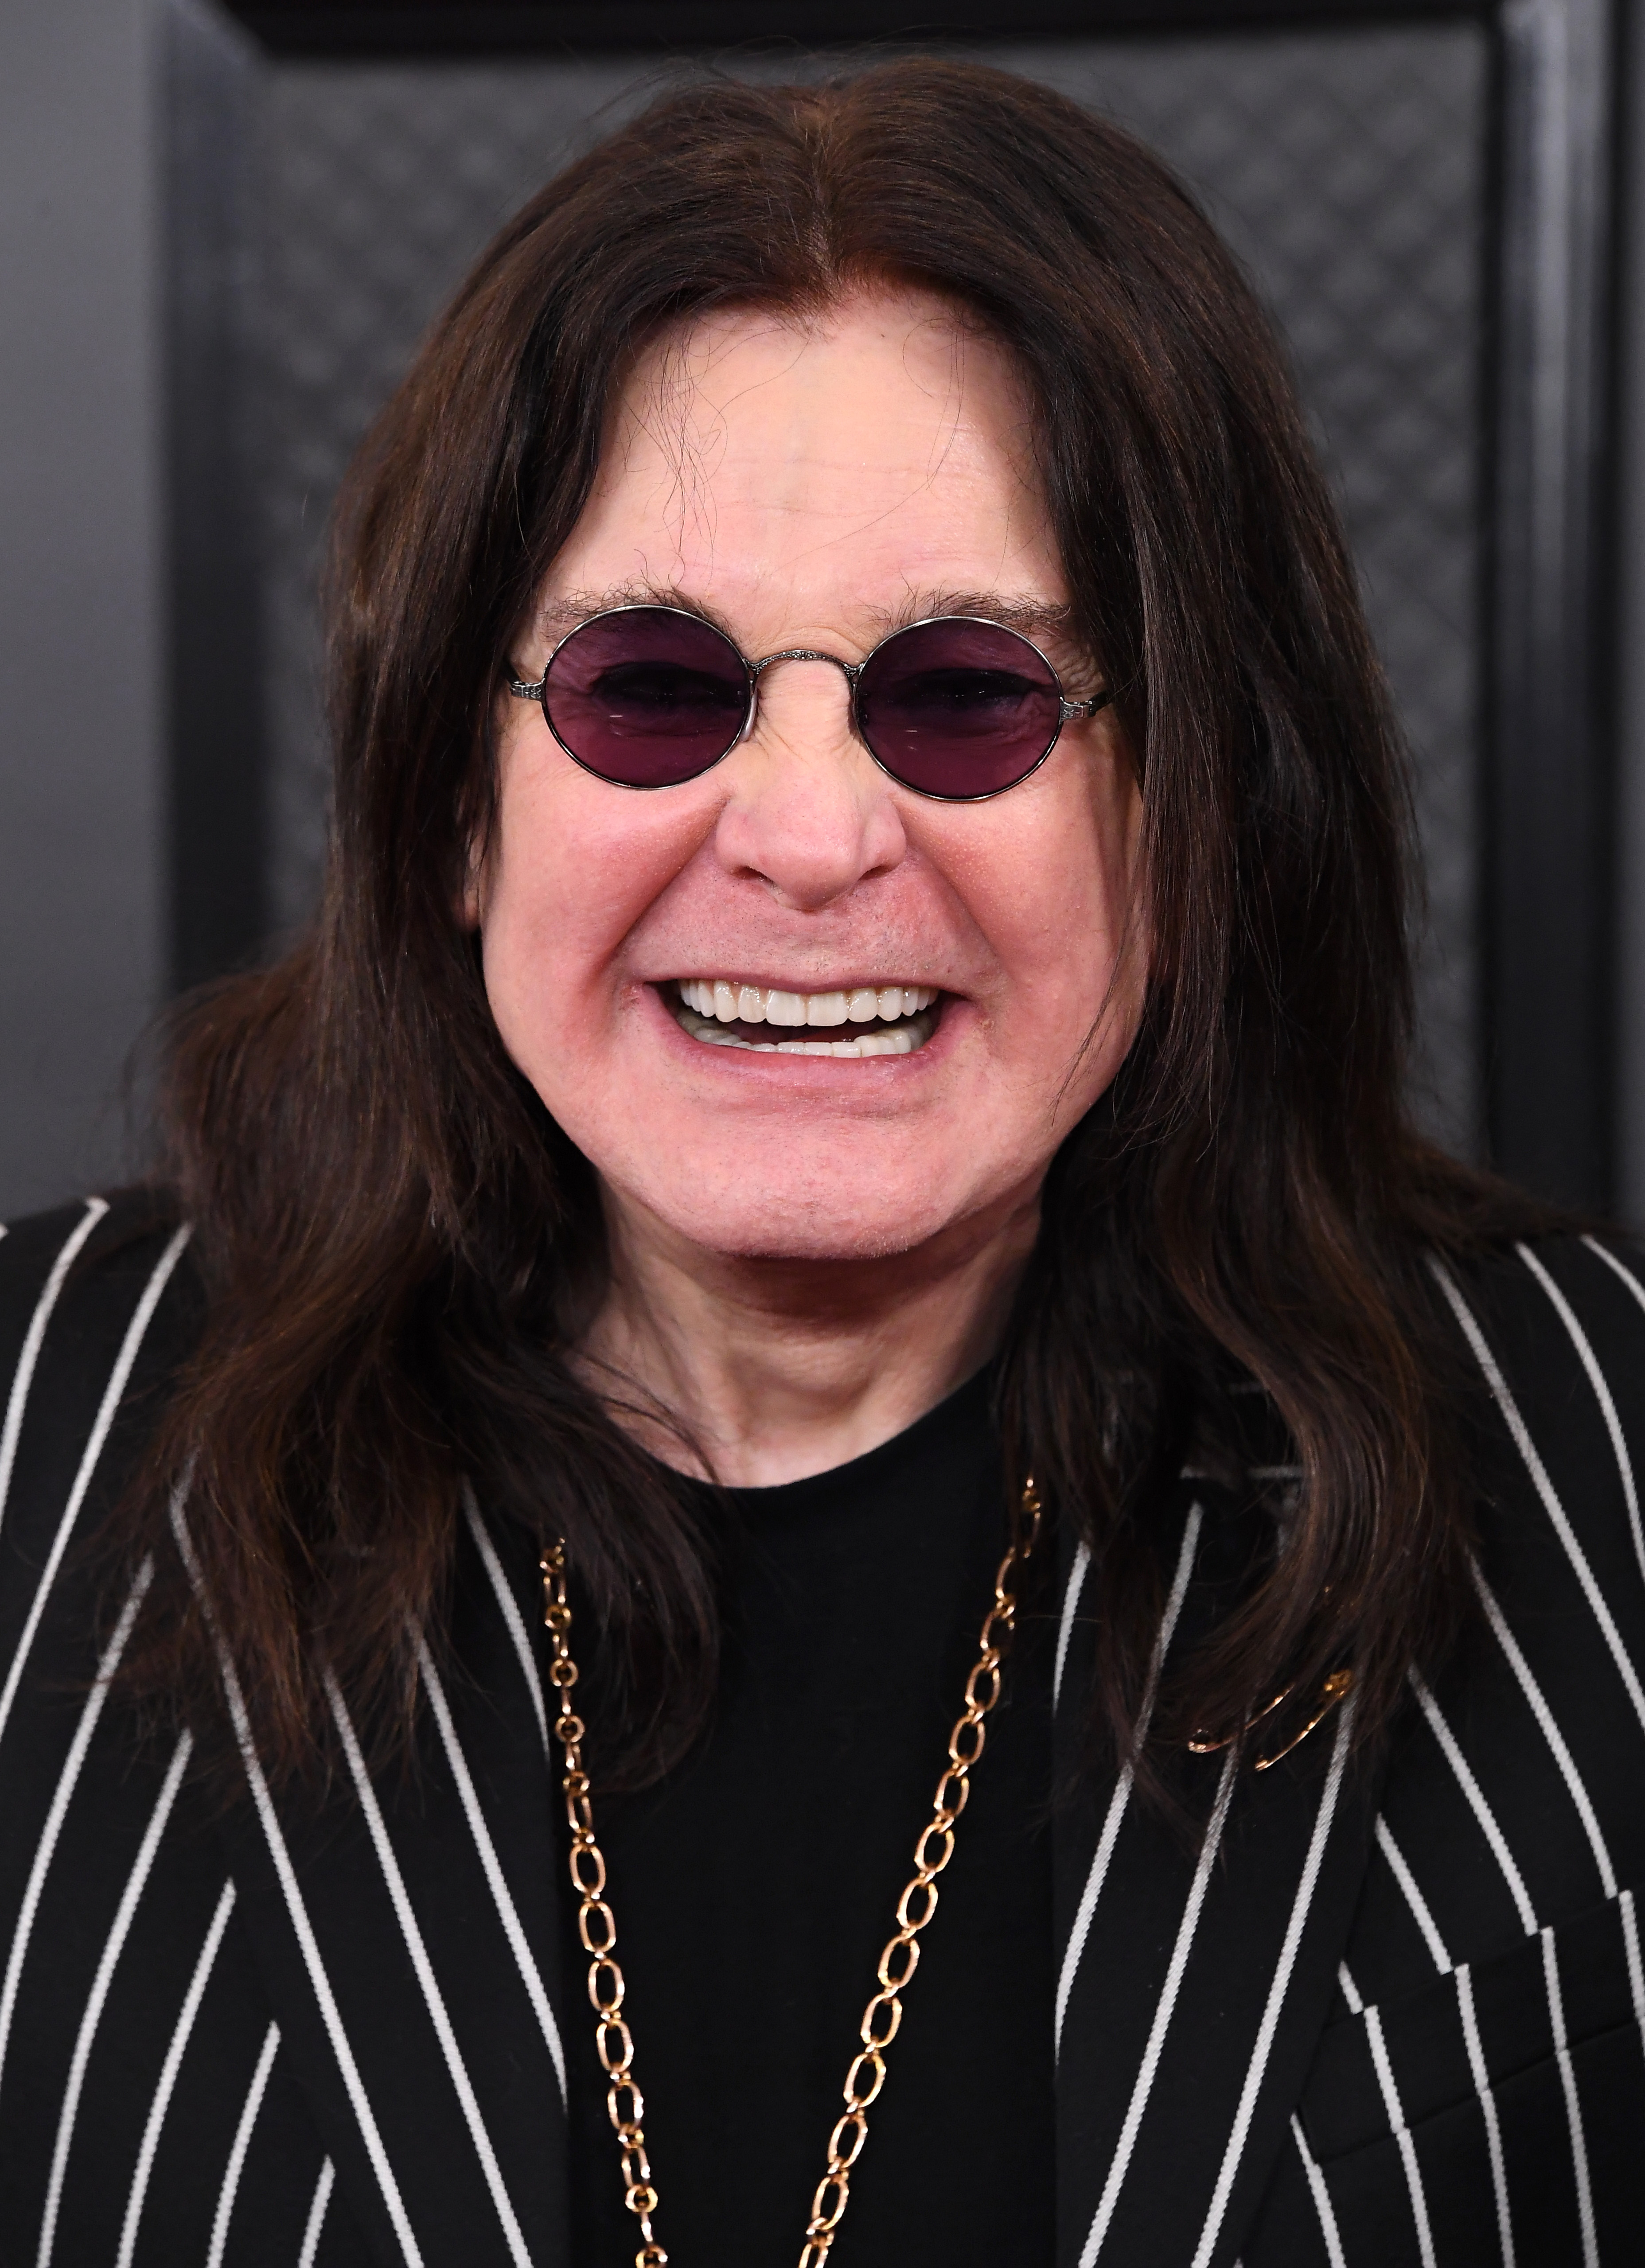 Ozzy Osbourne arrives at the 62nd Annual GRAMMY Awards at Staples Center in Los Angeles, California, on January 26, 2020. | Source: Getty Images